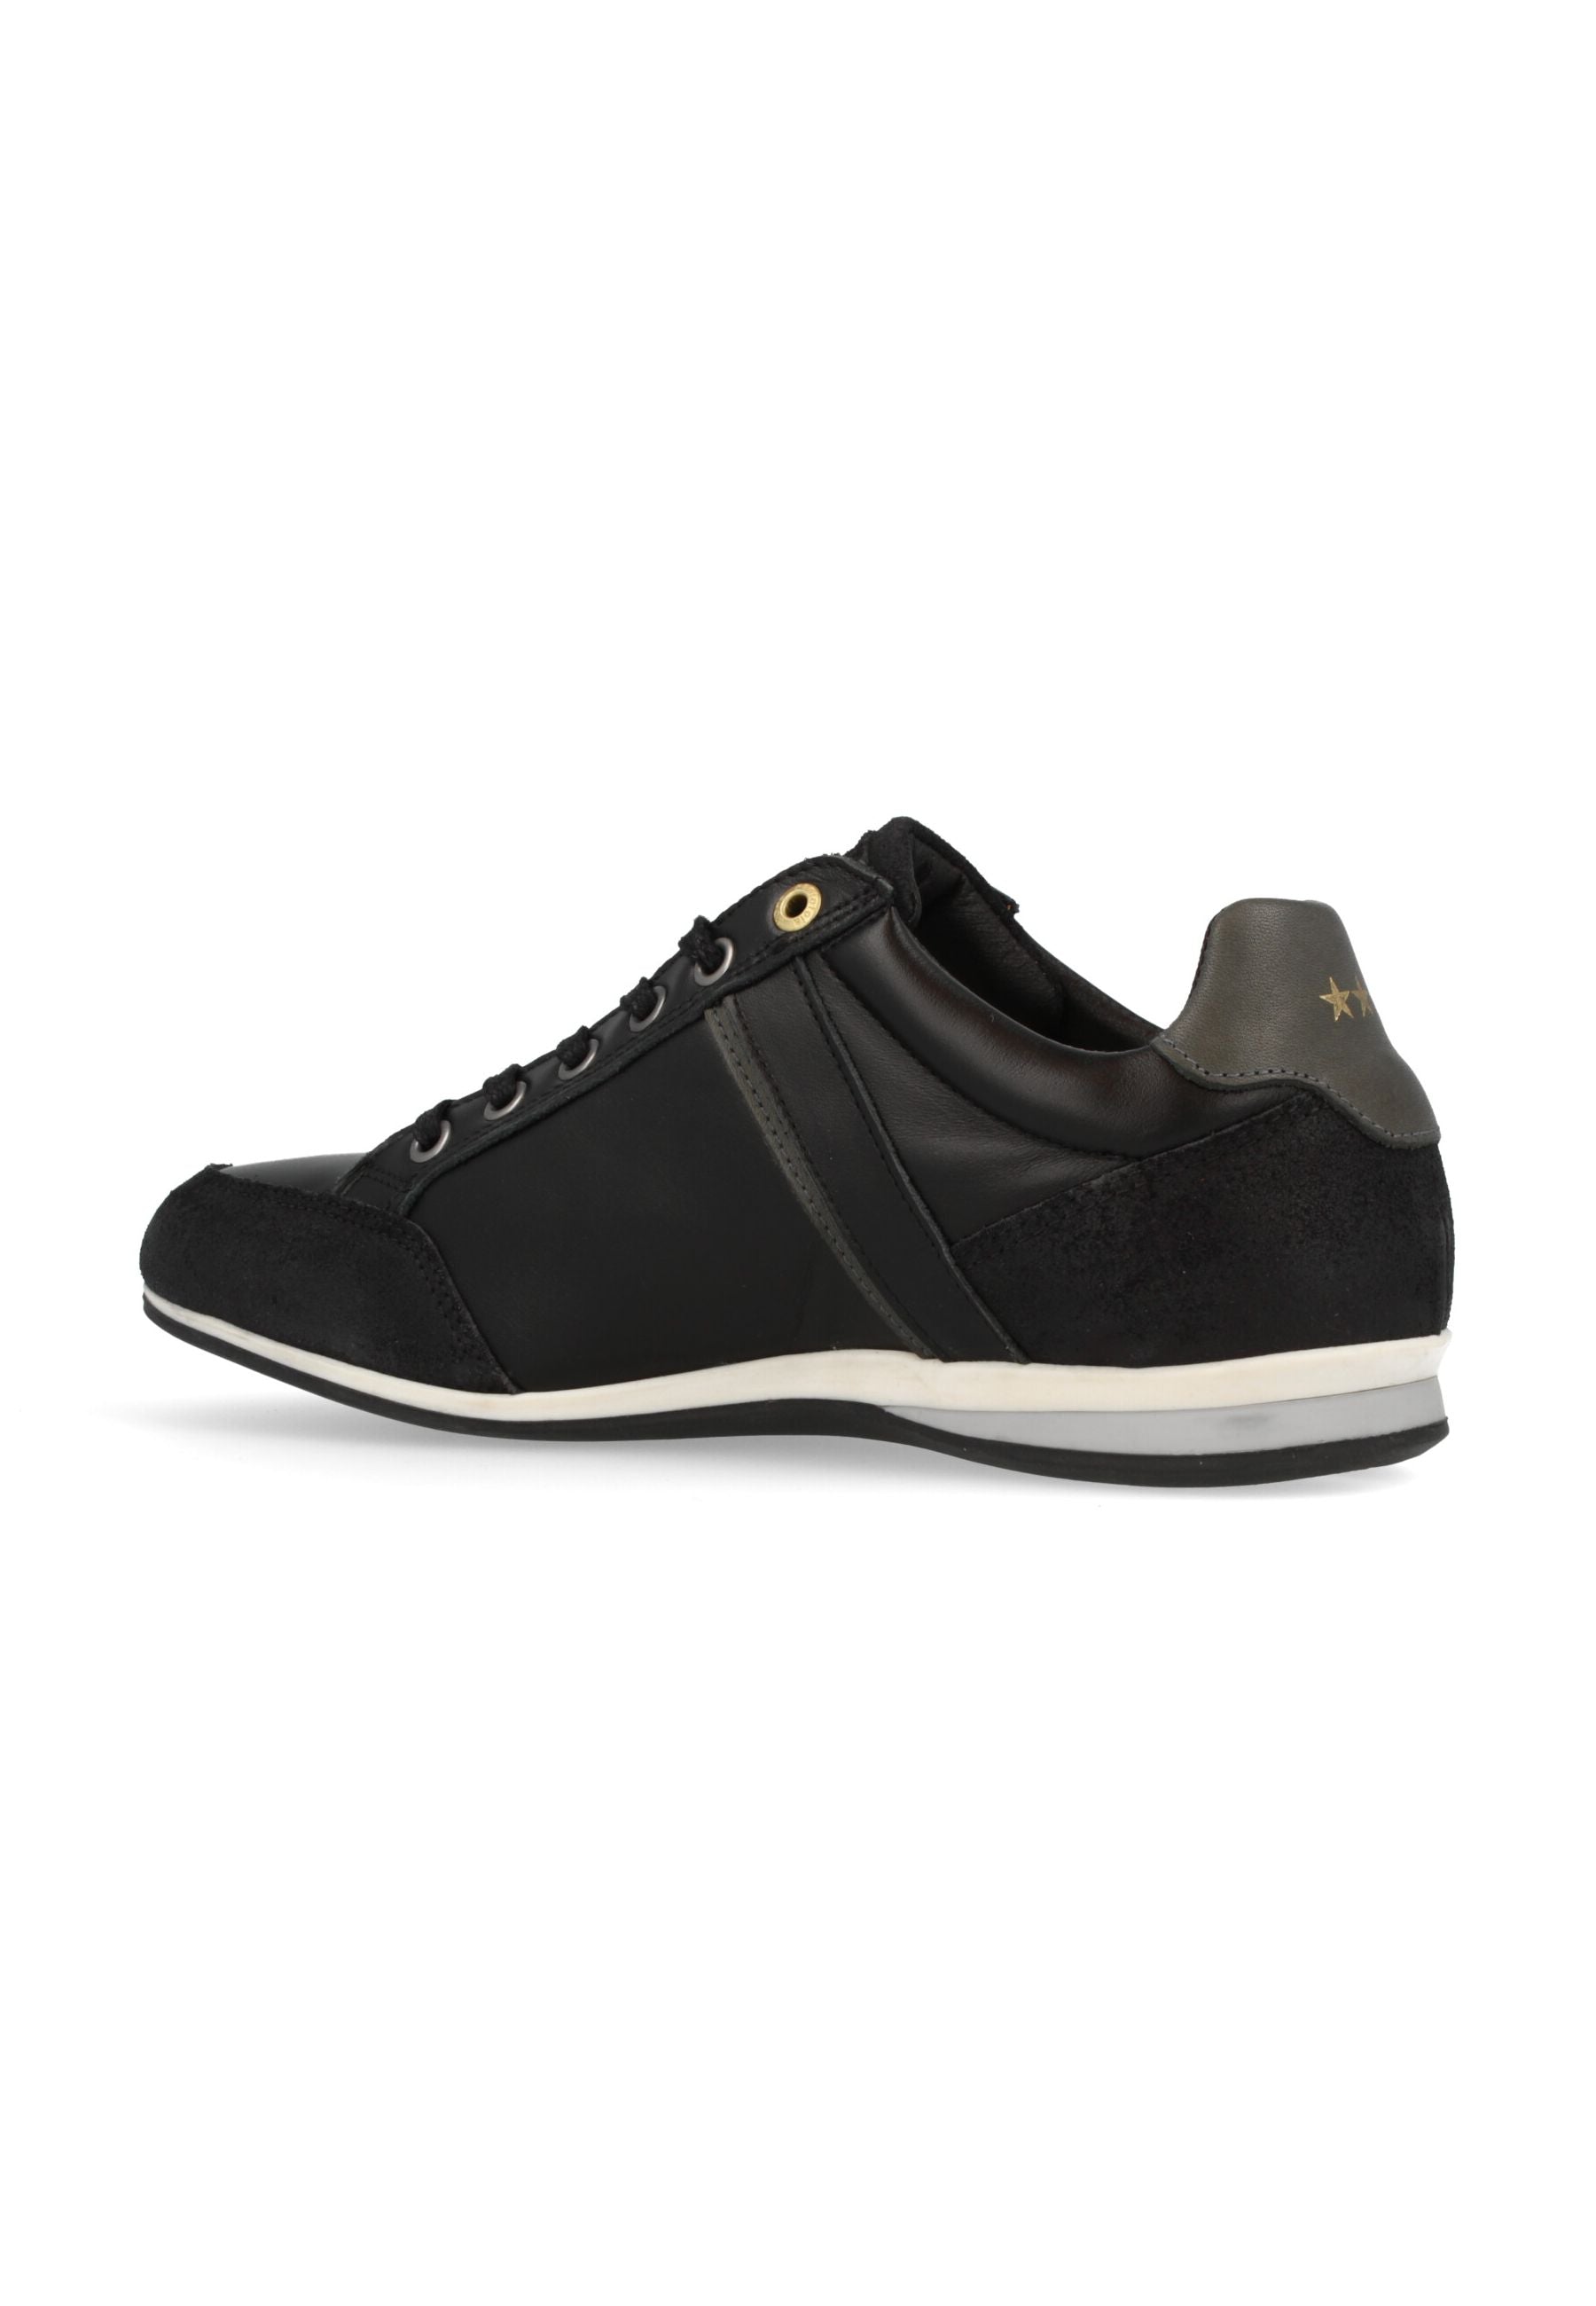 Roma Low in Black Sneakers Pantofola d'Oro   